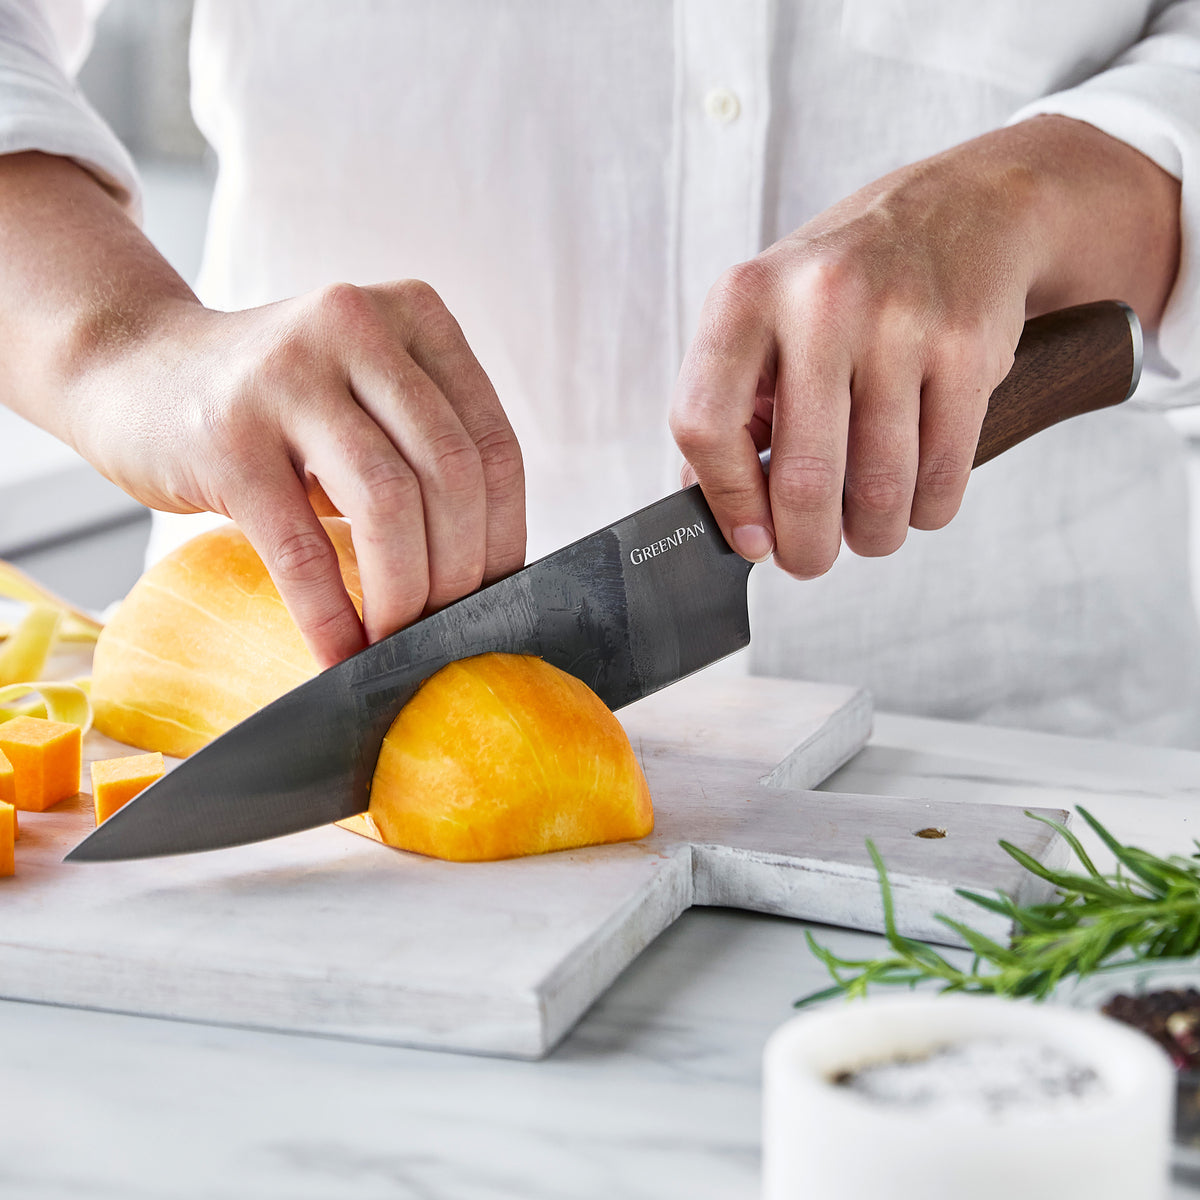 KYOCERA > The 4 piece essential ceramic knives for any home cook preparing  fresh meals.